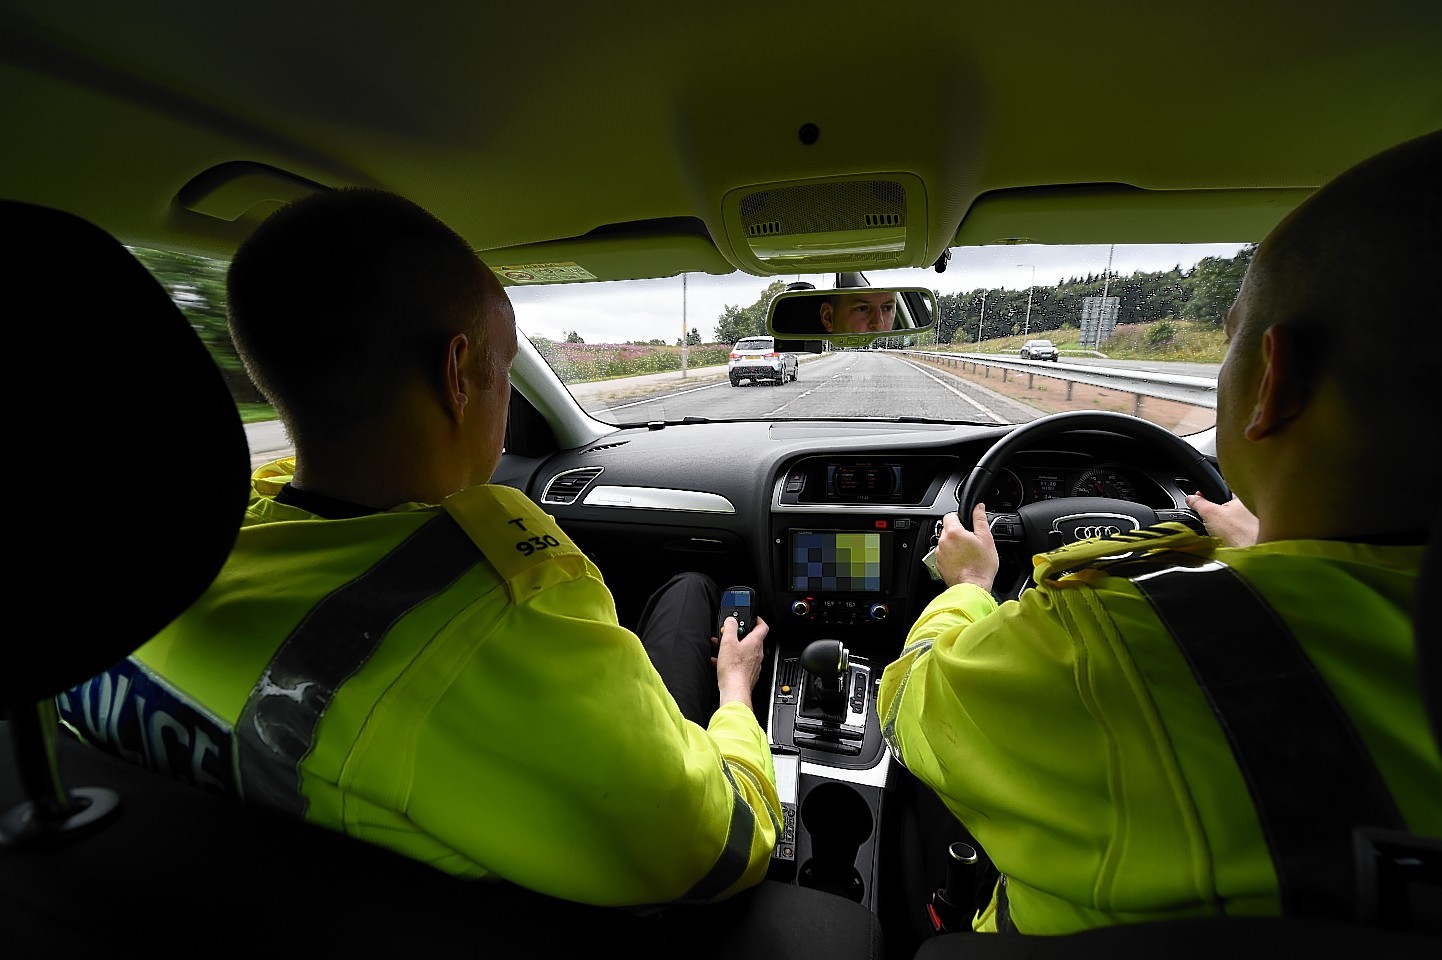 Patrol with Police Scotland Aberdeenshire roads policing department, about the work they do catching some of the worst speeders in the north-east on the A96 